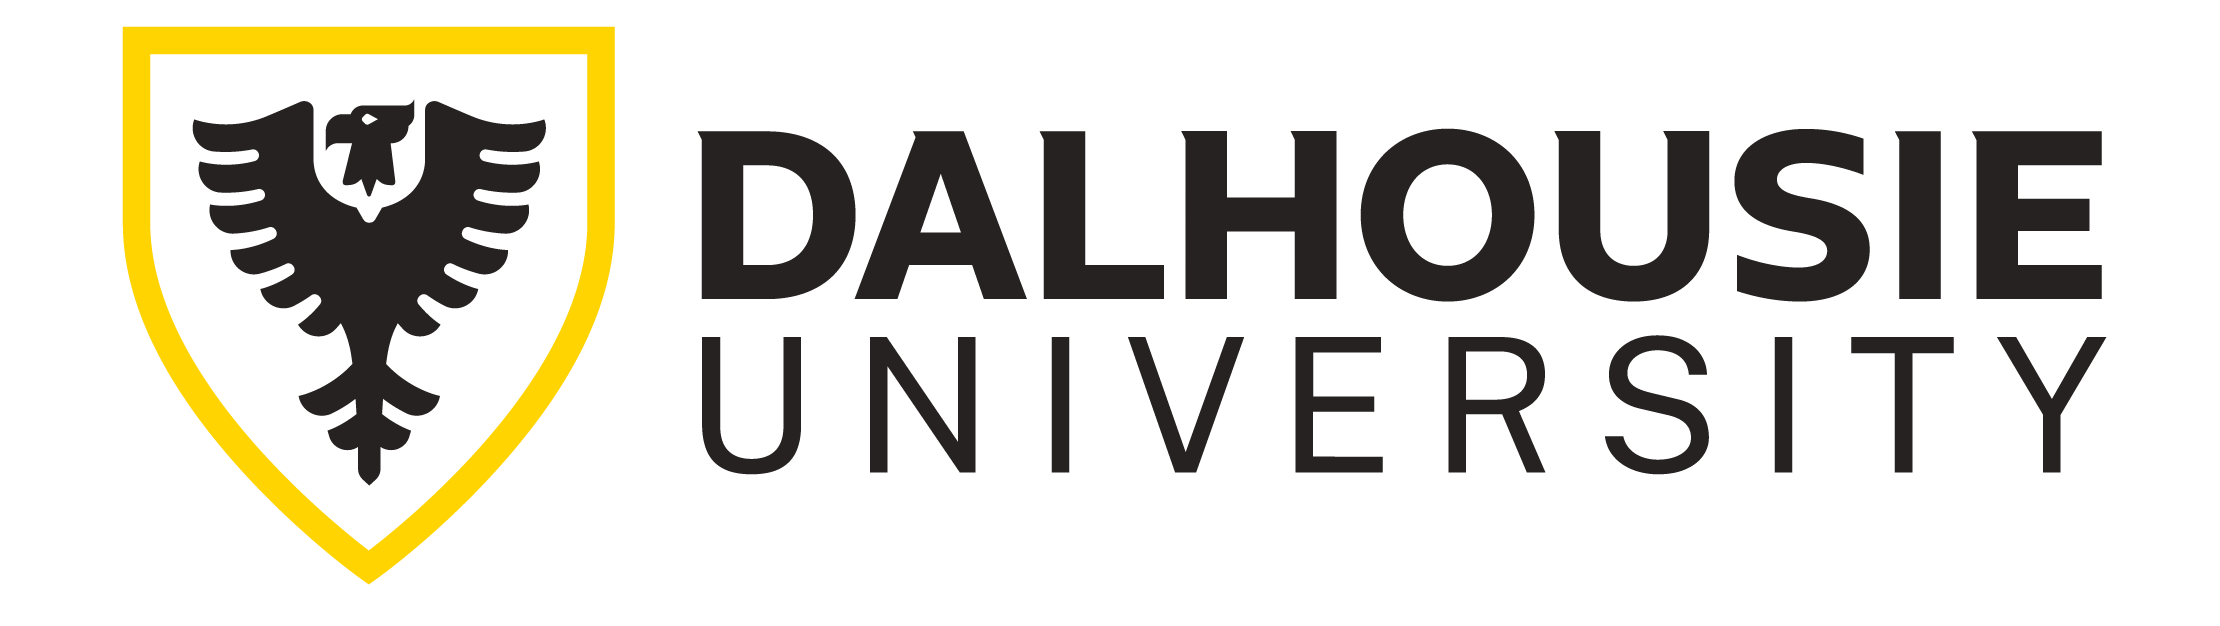 The logo for Dalhousie University in Nova Scotia, Canada: a stylized black bird in a yellow shield and the university's name to the right.